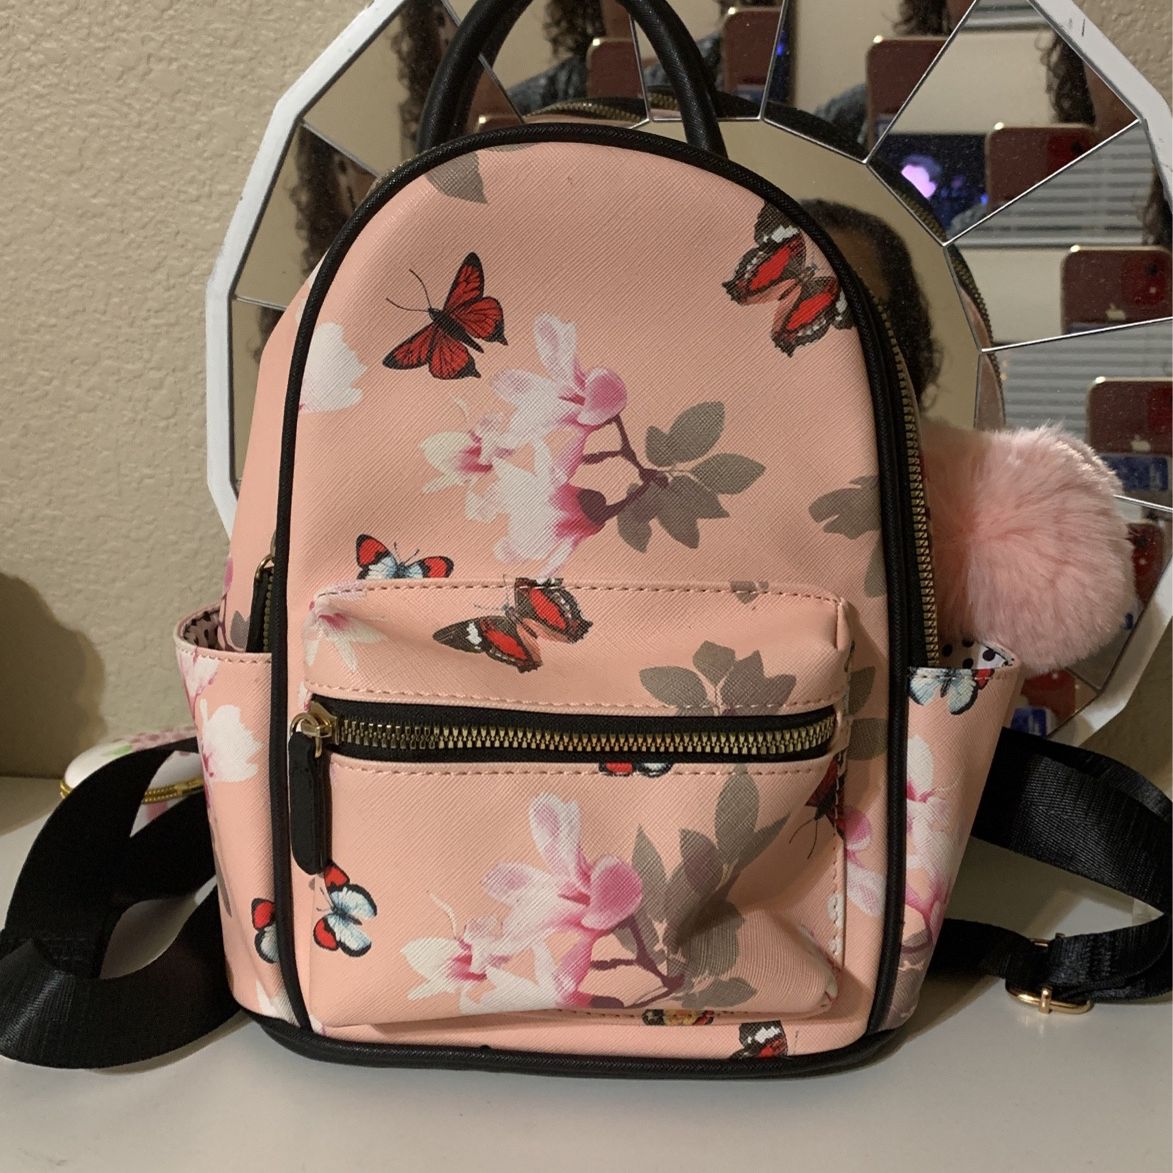 Tiny backpack by the pool monogram for Sale in Peoria, AZ - OfferUp